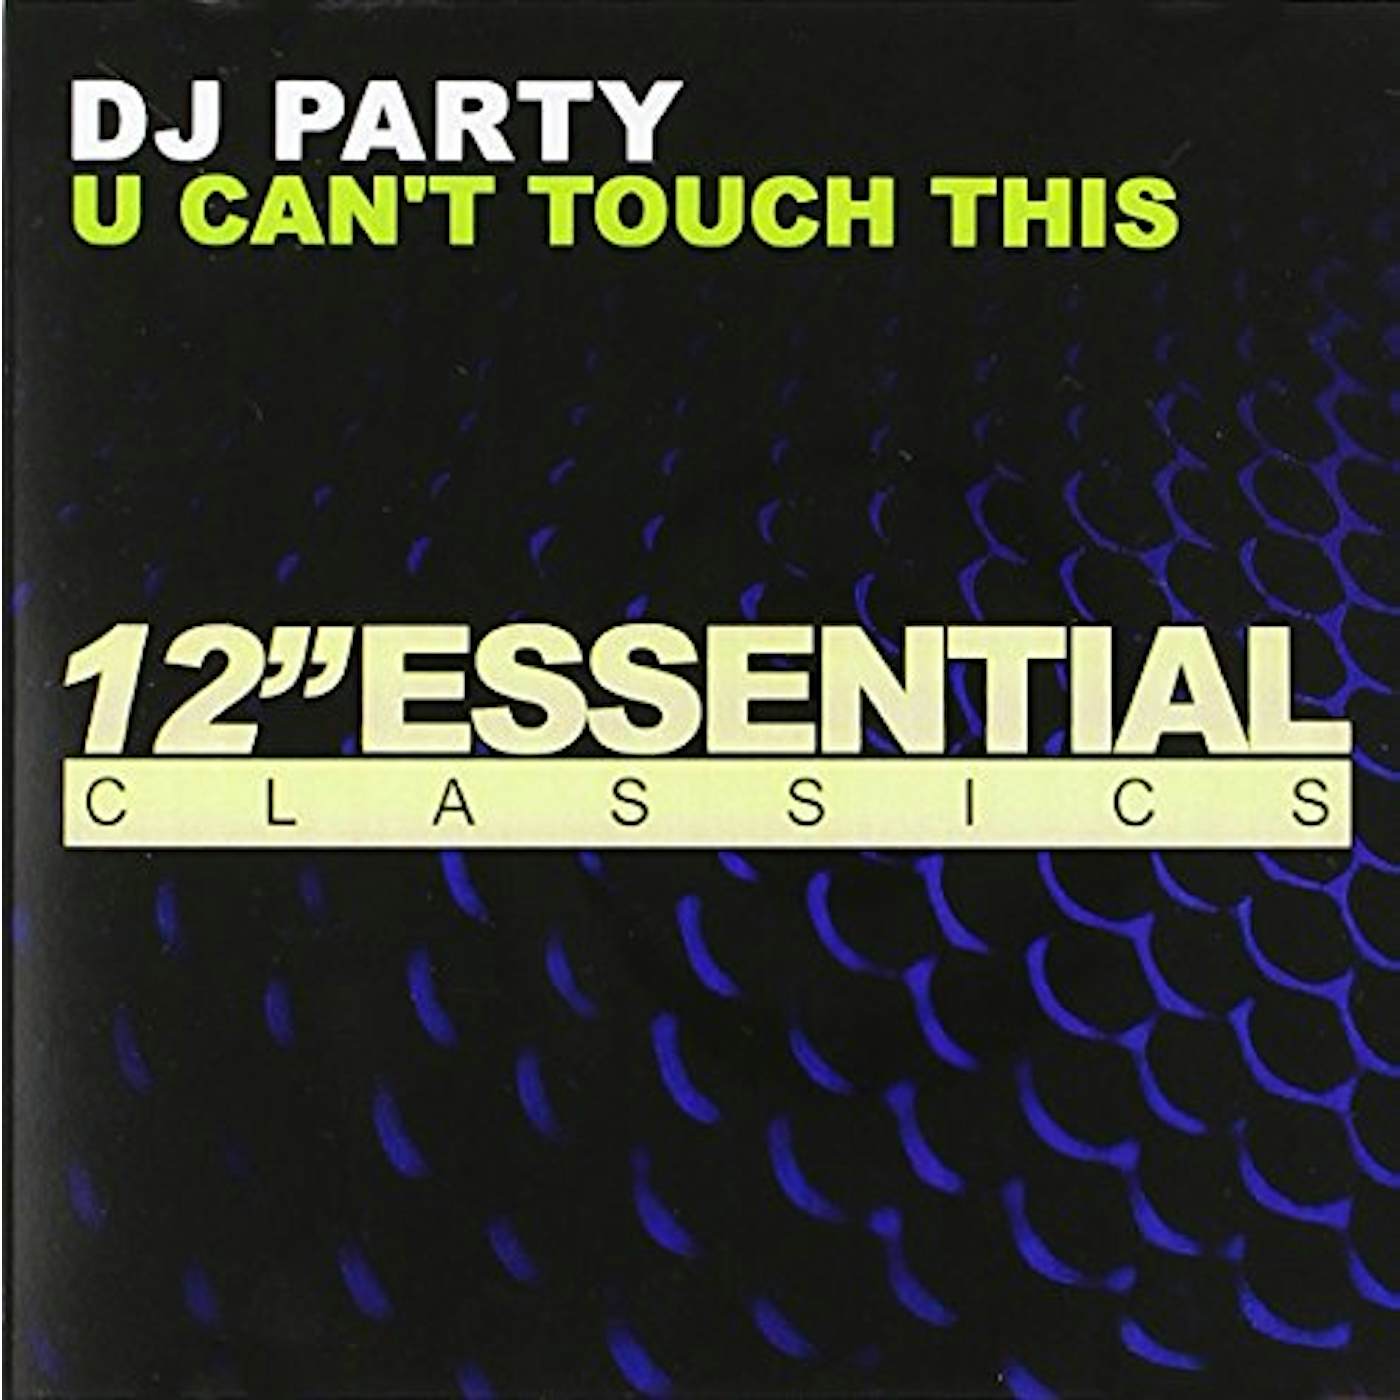 DJ Party U CAN'T TOUCH THIS CD